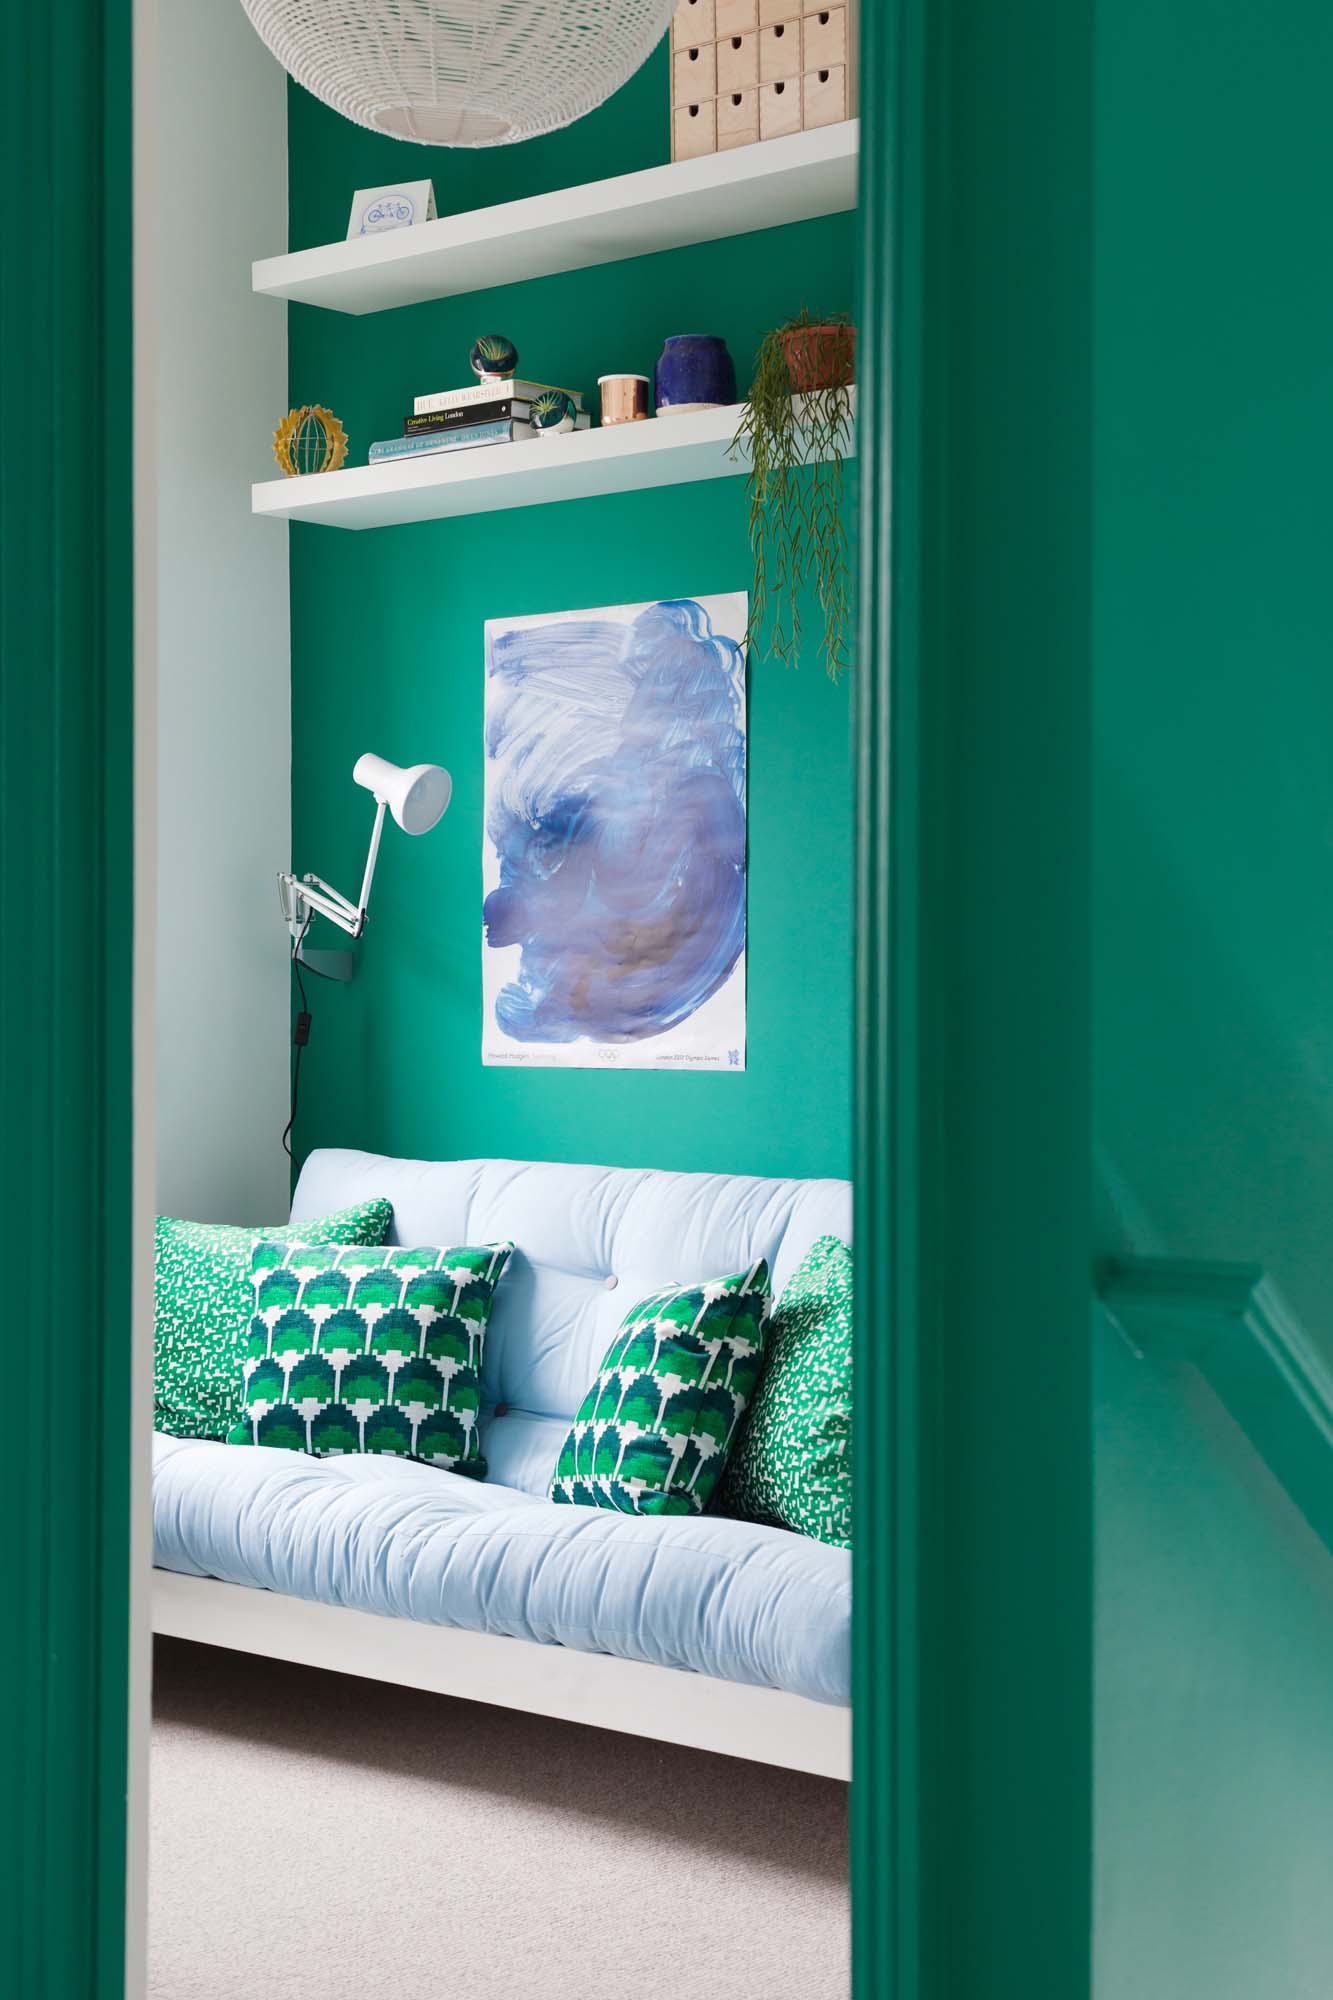 The Interior Colour Rules You Should Nearly Always Break